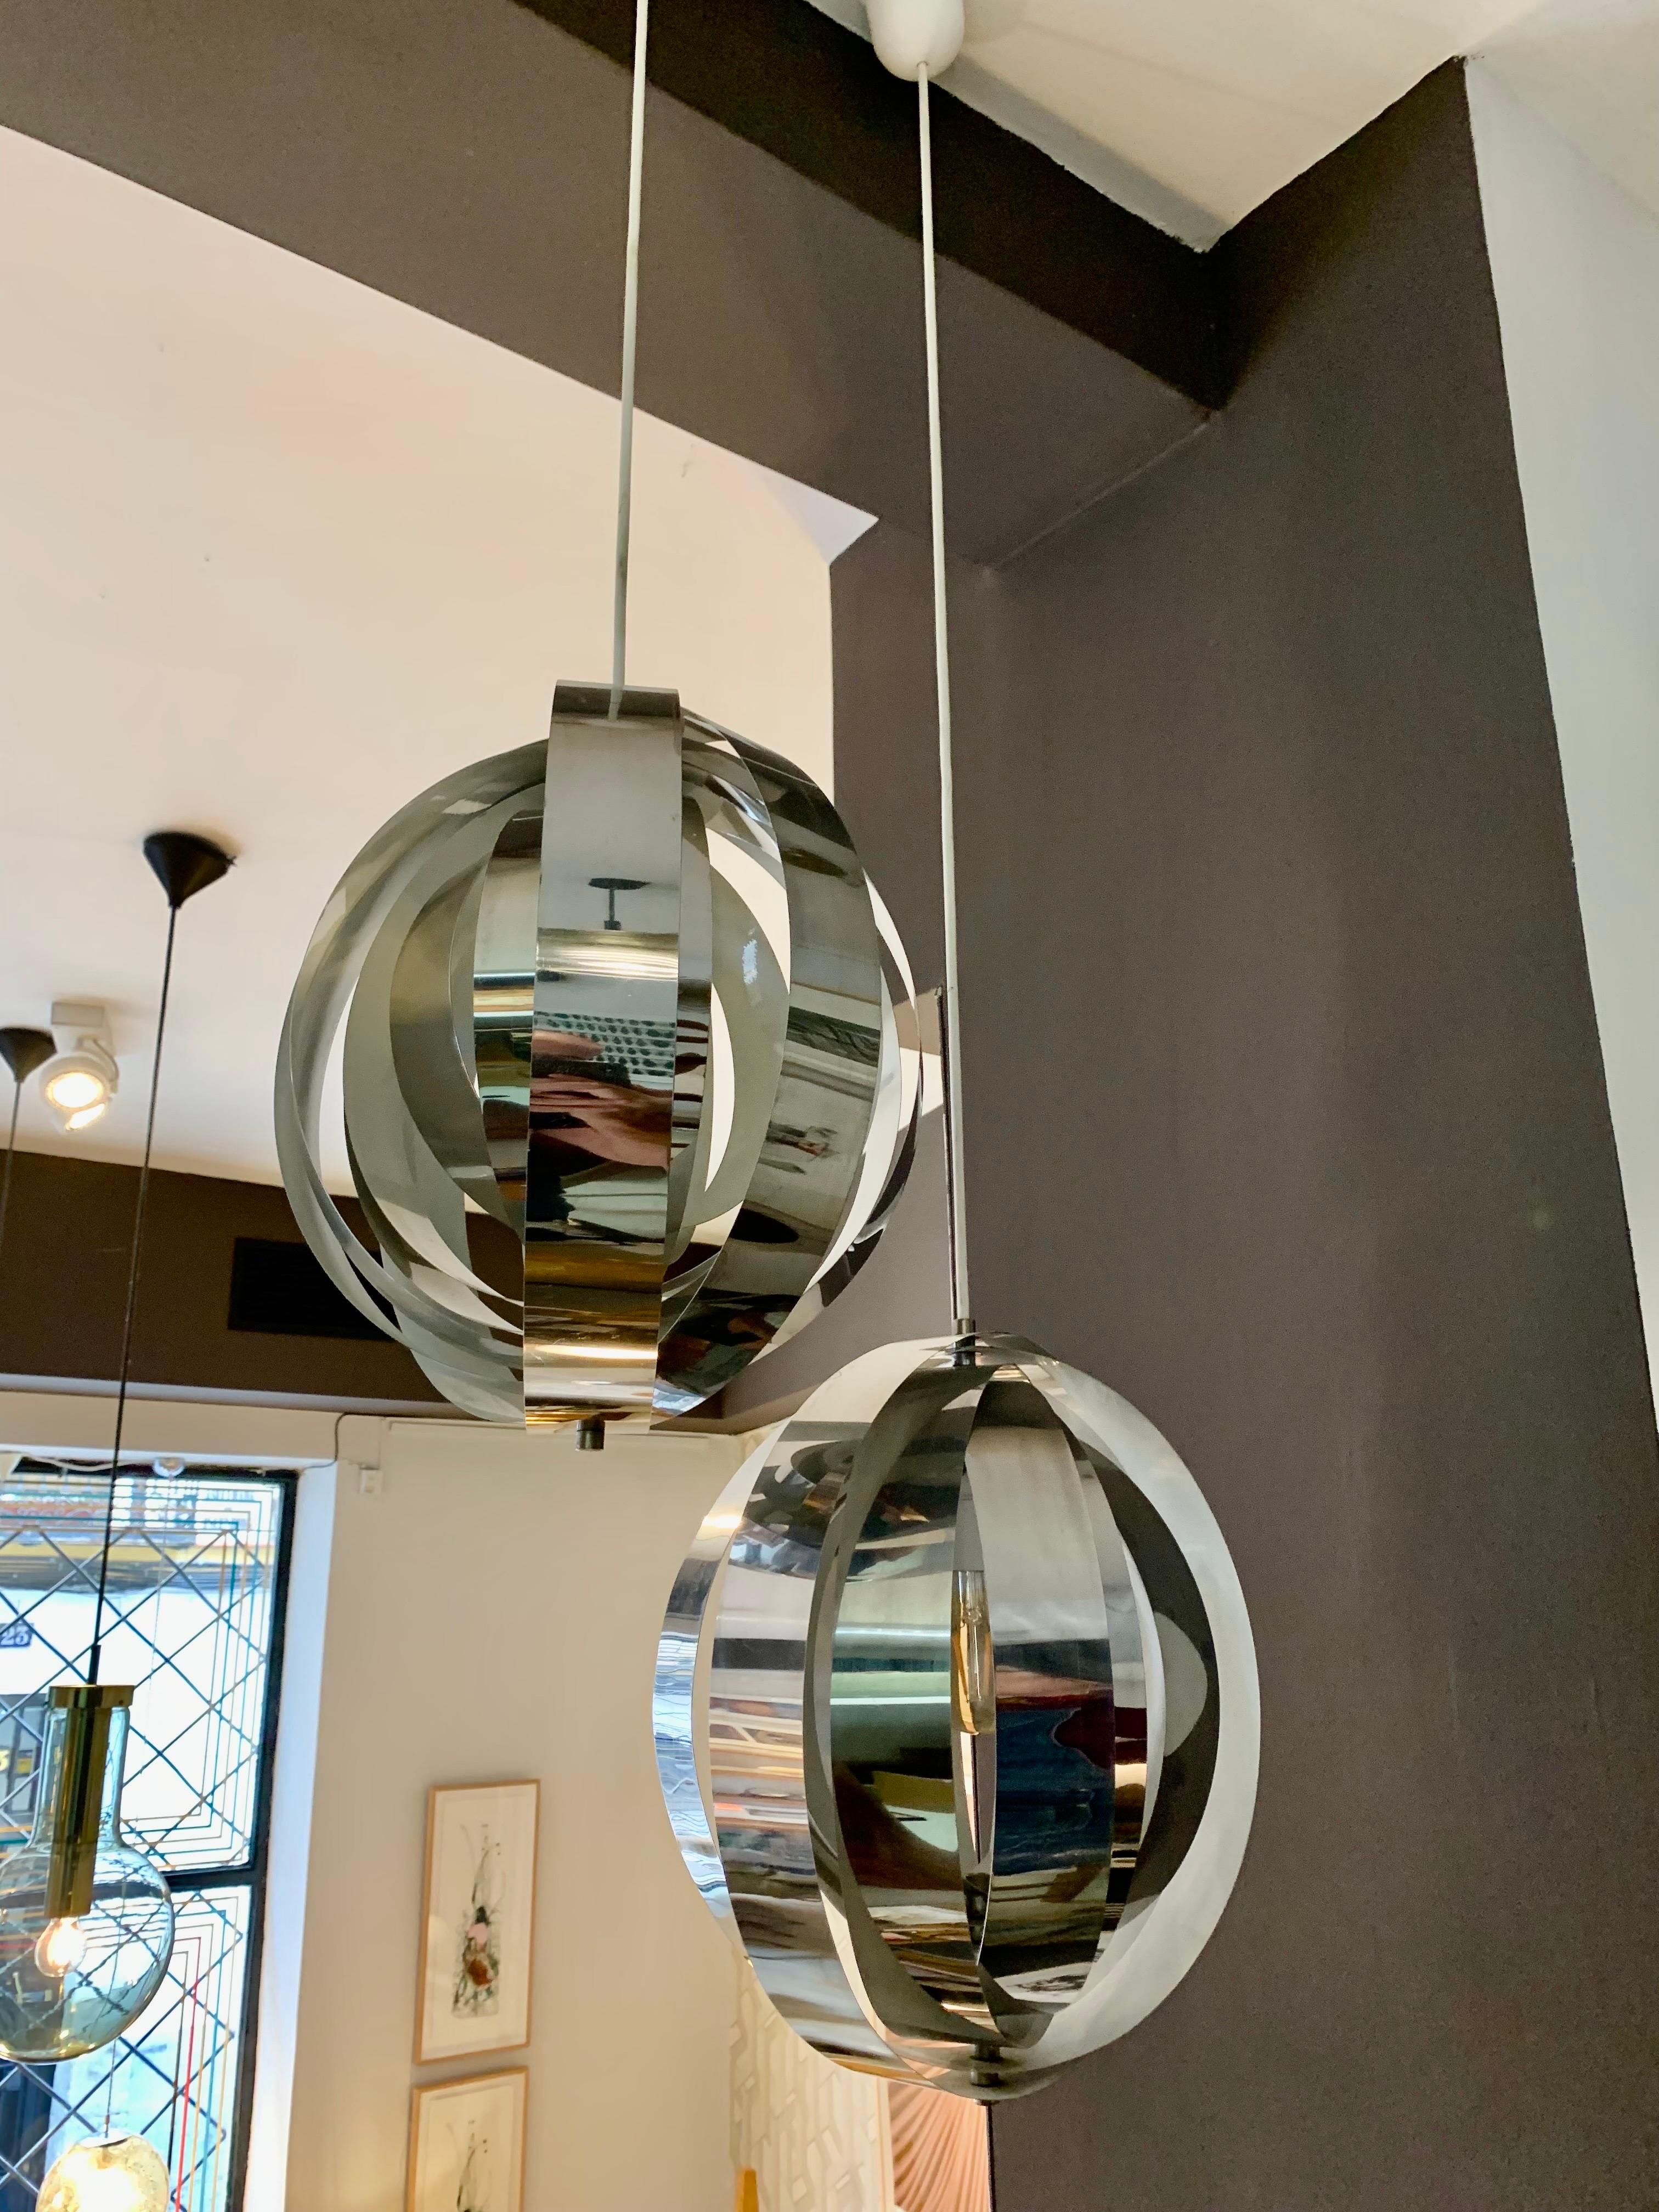 The Moon model pendant lamp in 1960 by Verner Panton for Louis Pulsen. It was one of his first lighting designs. The lamp is characterized by its design in the form of concentric arches with ten ring-shaped lamellae, in this case made of chromed